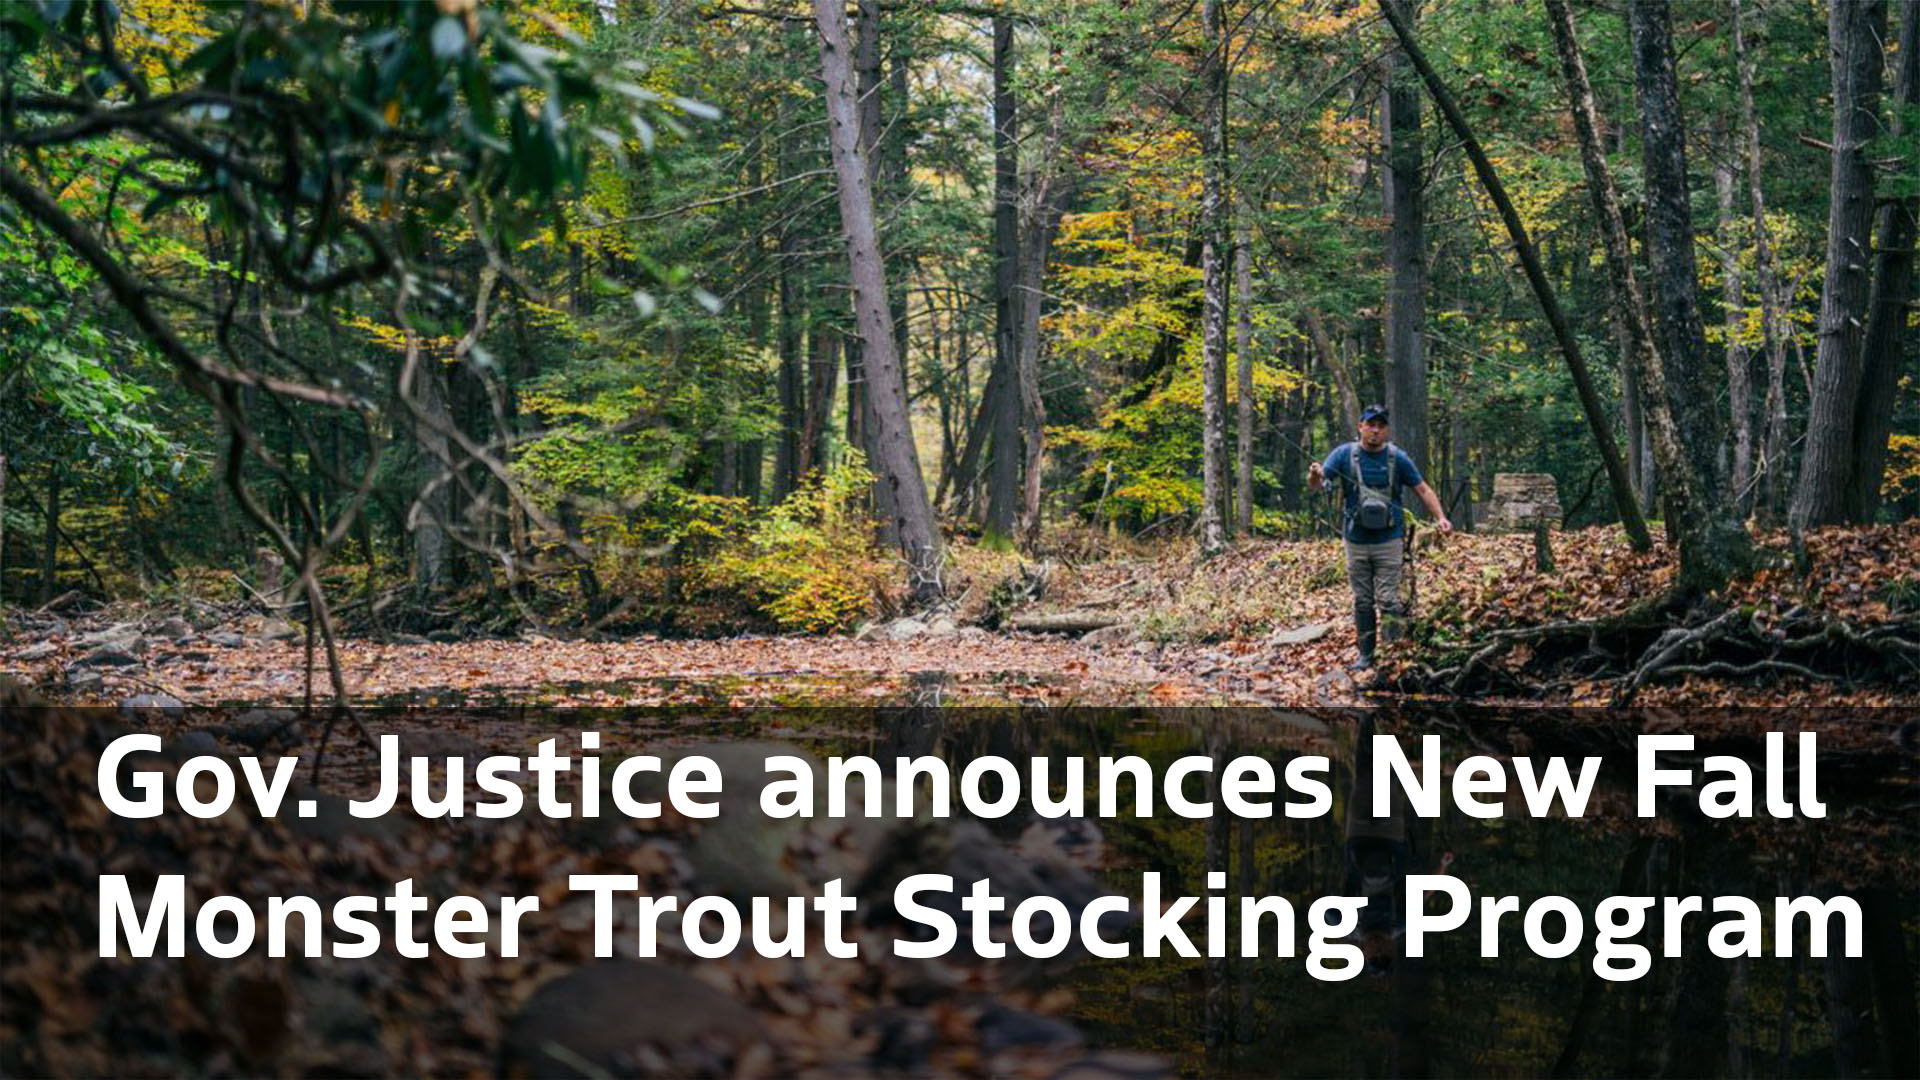 Gov. Justice announces New Fall Monster Trout Stocking Program